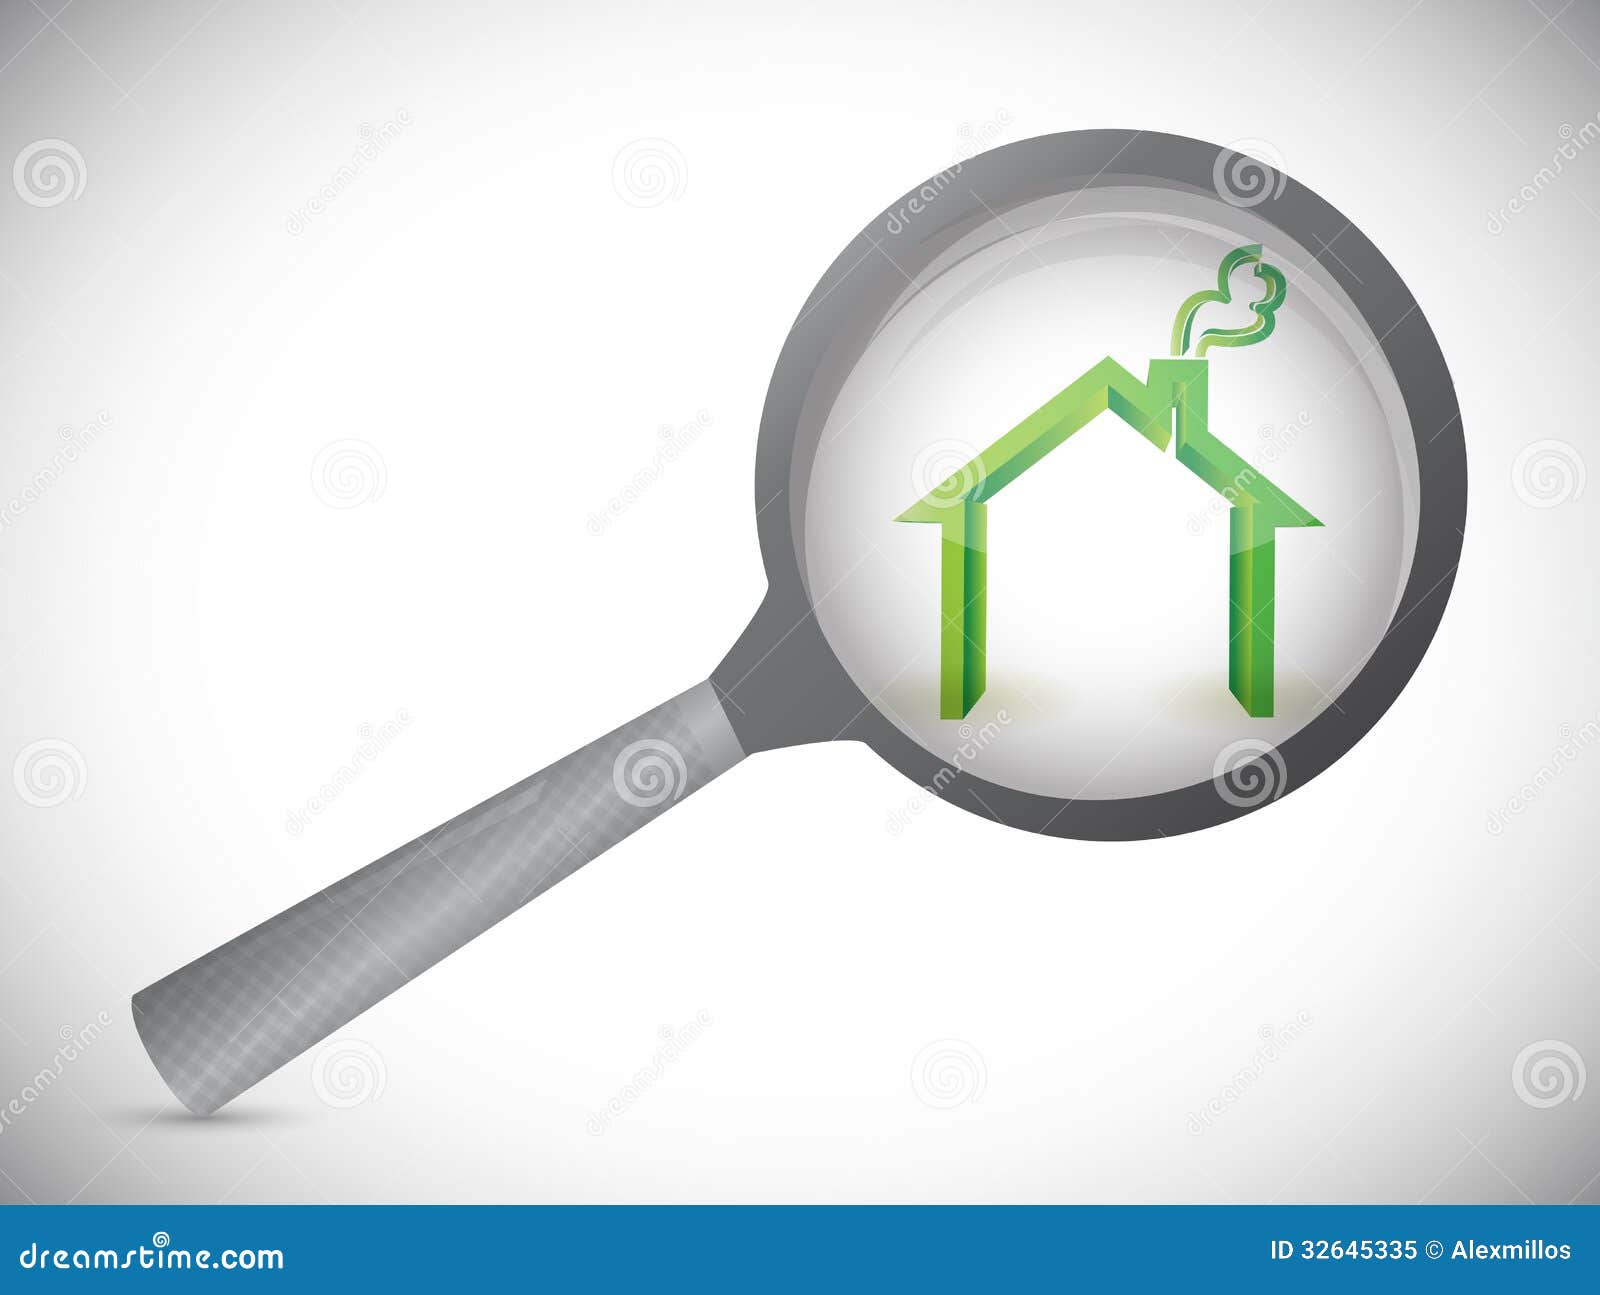 home inspector clipart free - photo #32